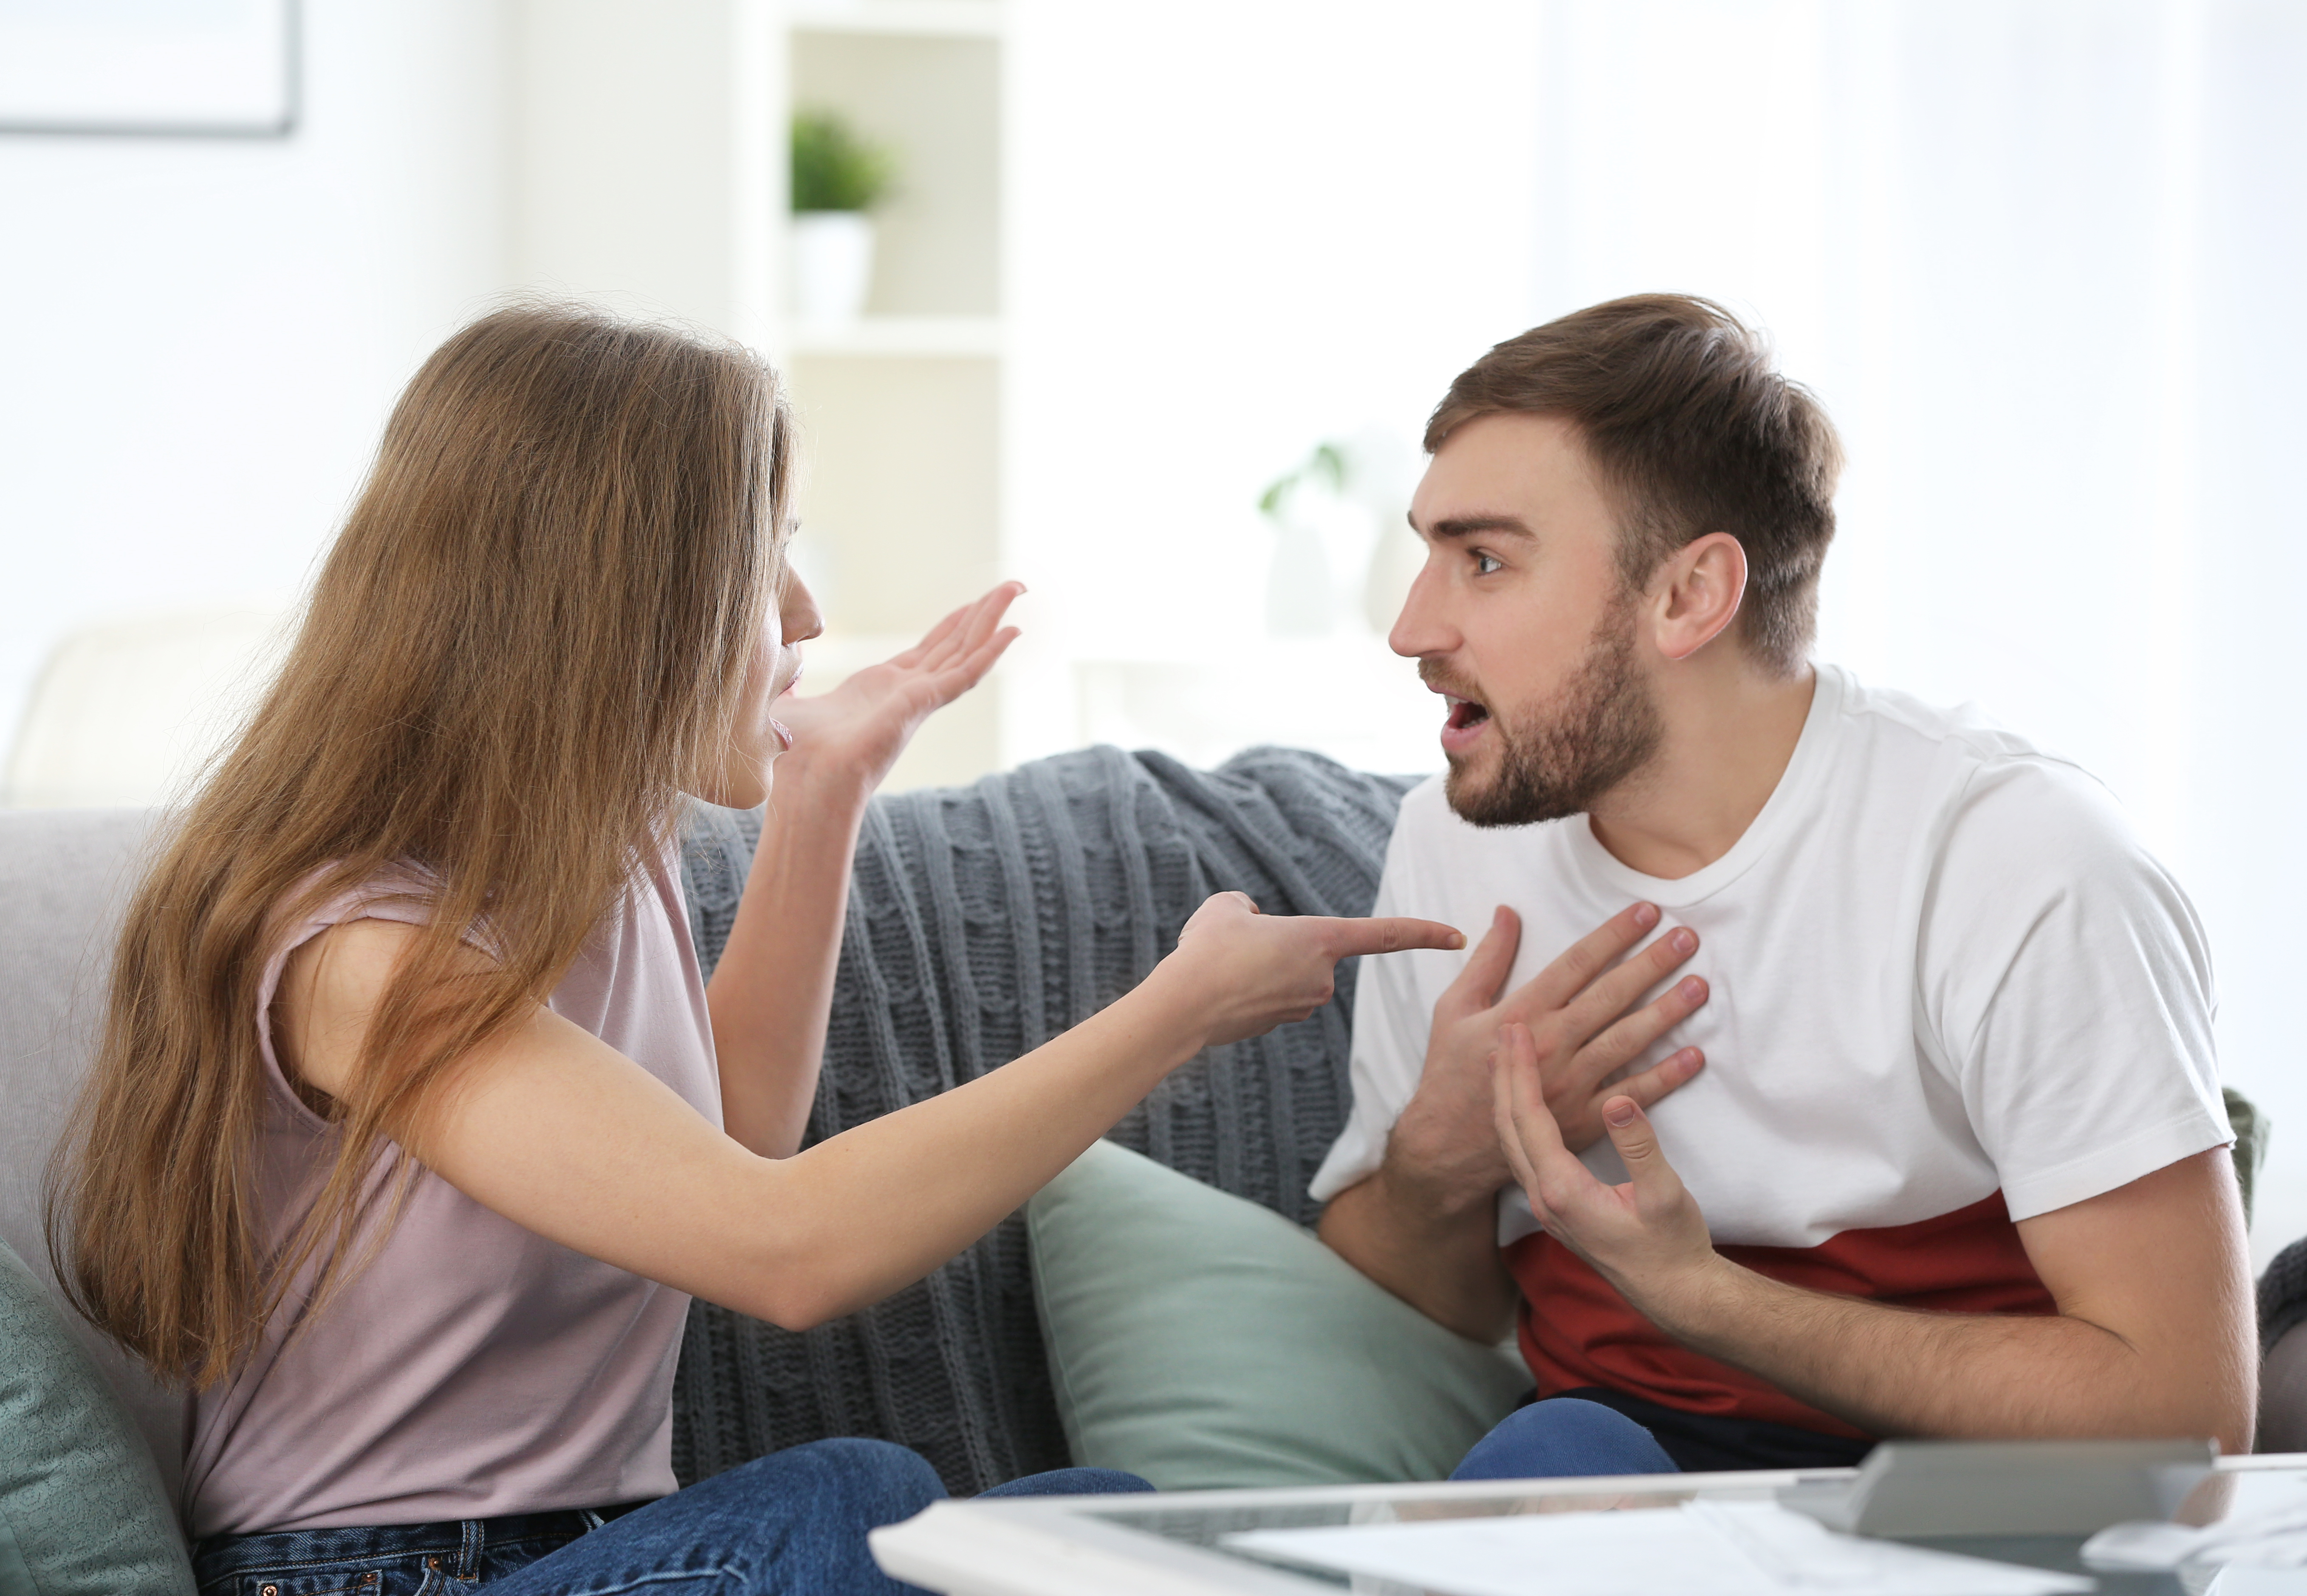 A young couple arguing at home | Source: Shutterstock